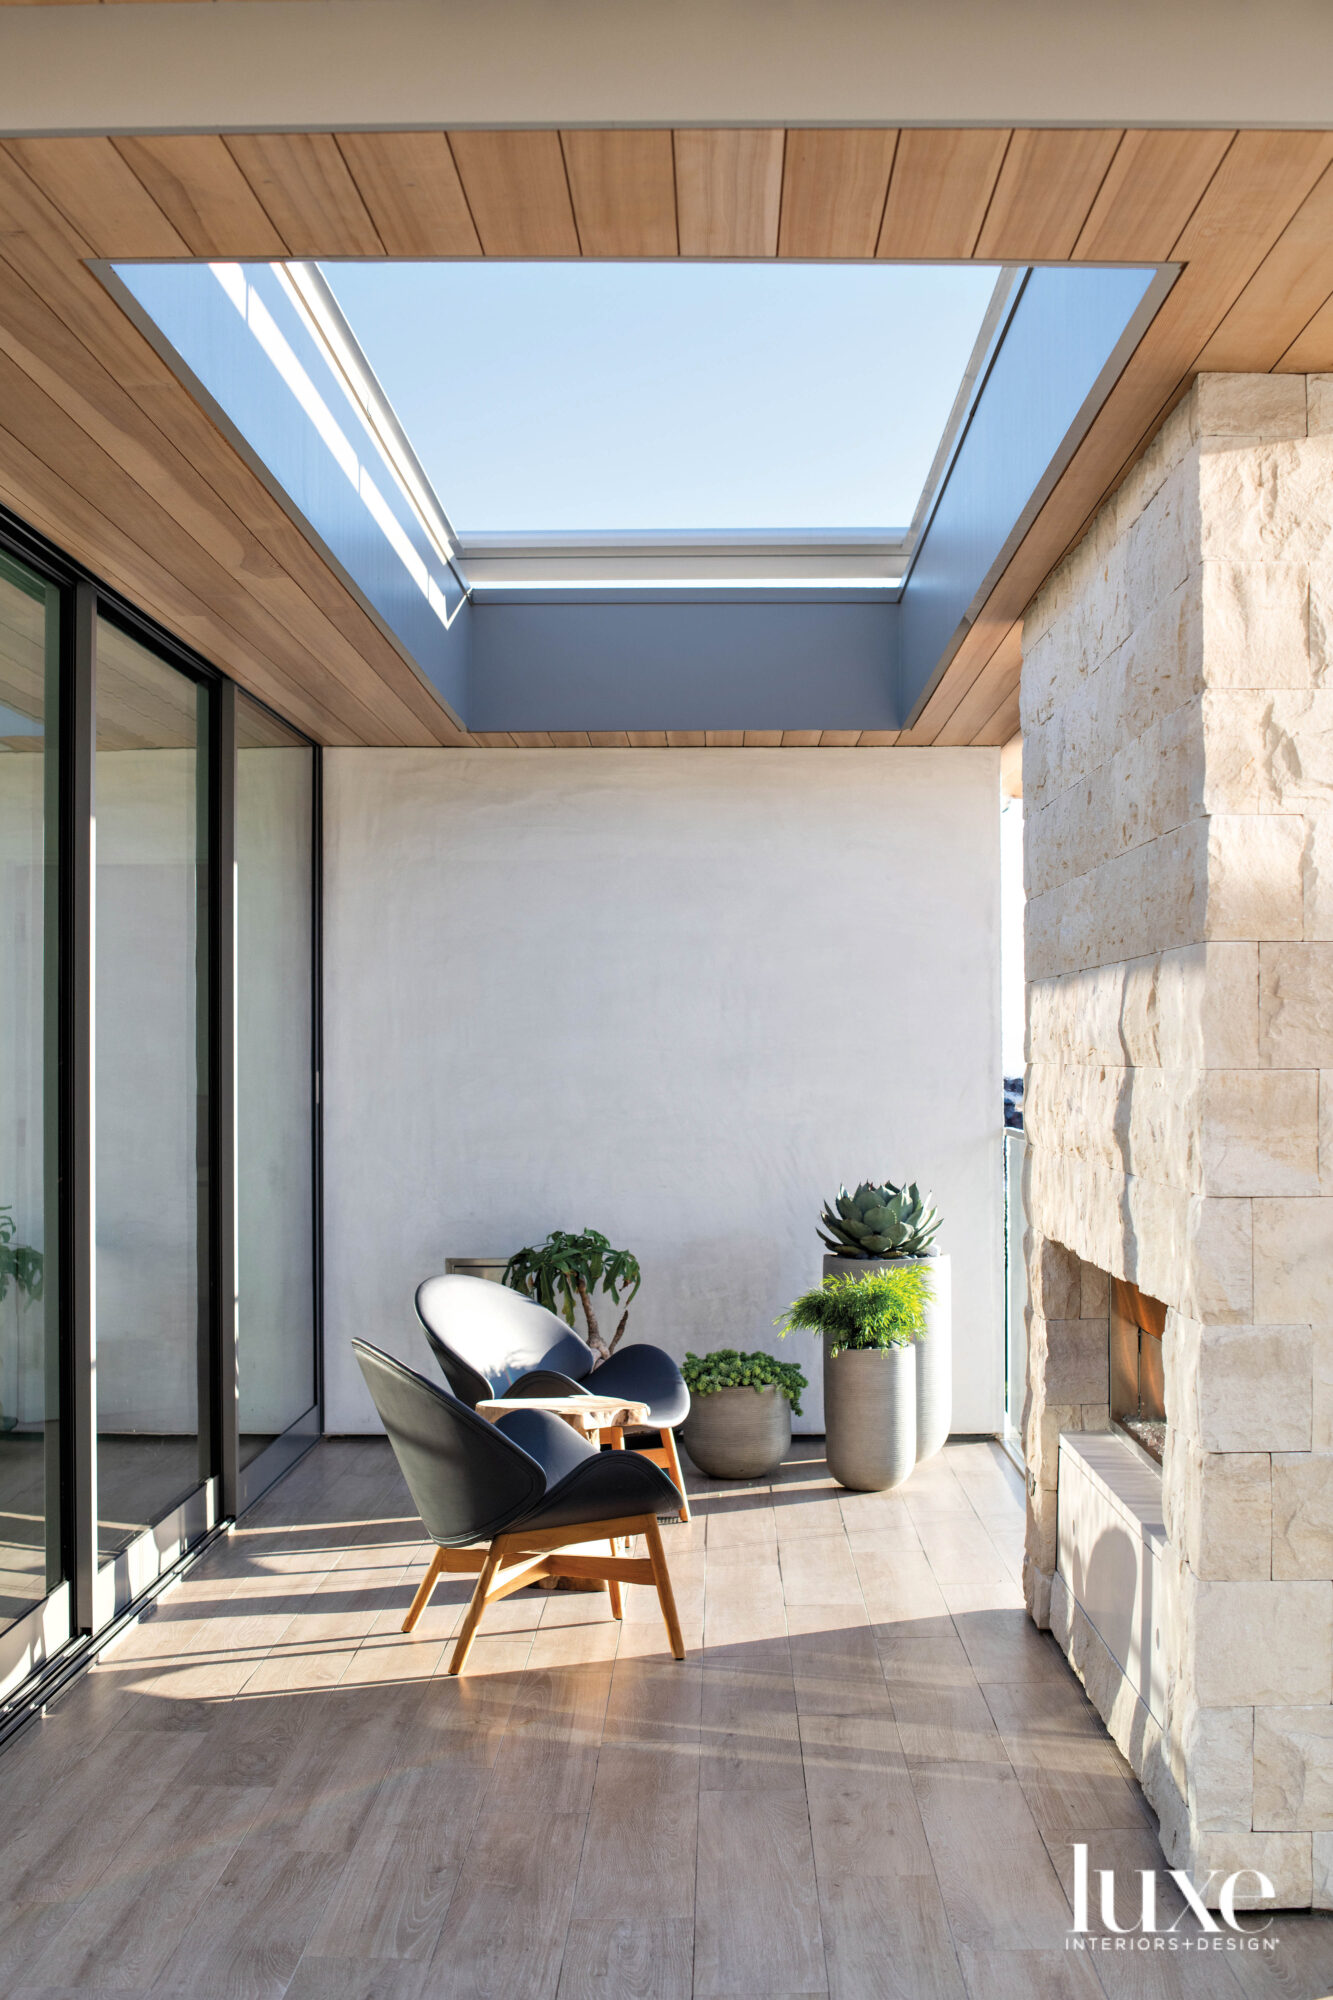 Terrace with skylight above and seating and fireplace